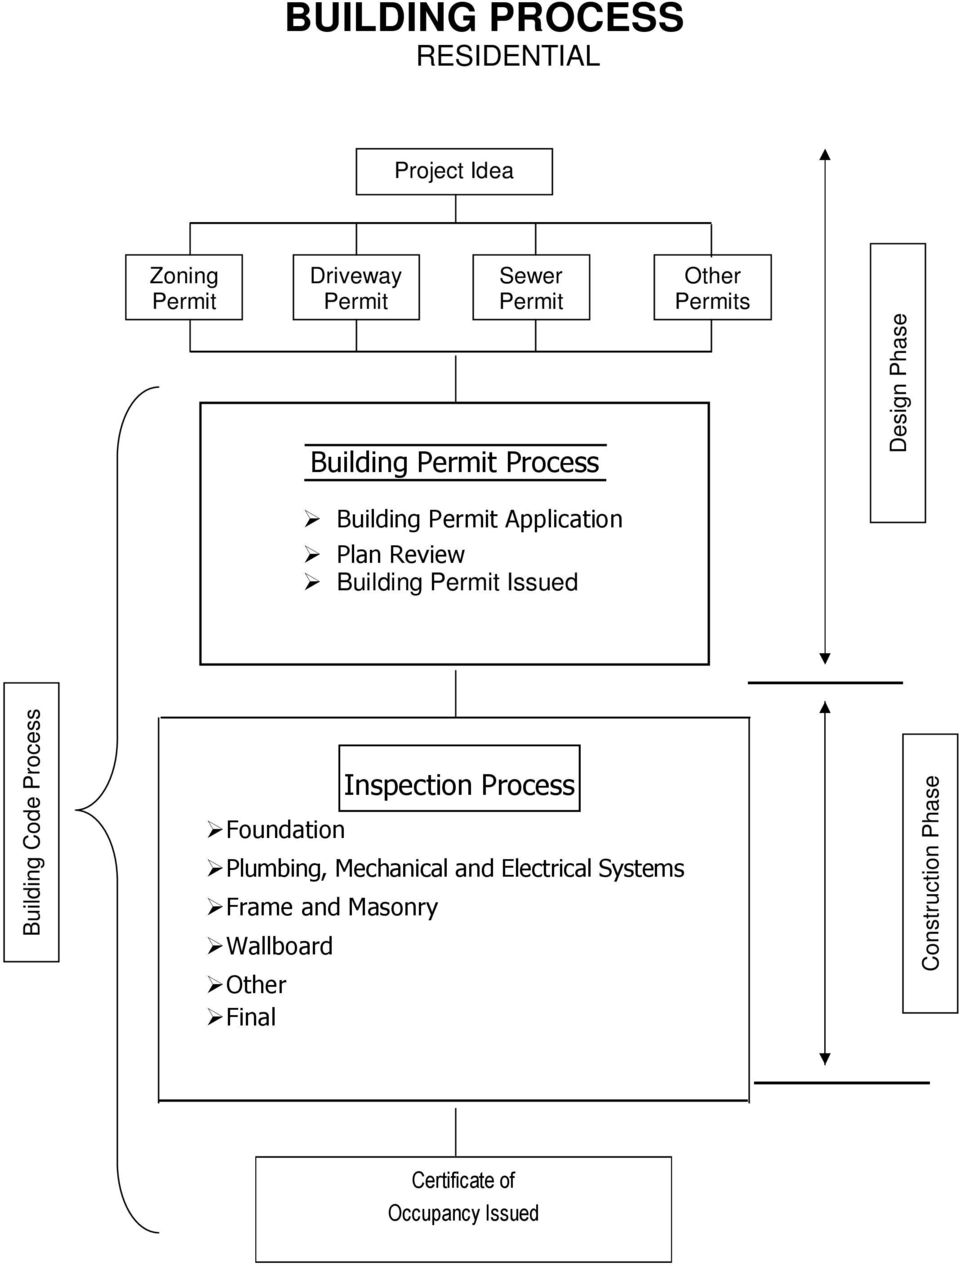 Permit Issued Building Code Process Foundation Inspection Process Plumbing, Mechanical and